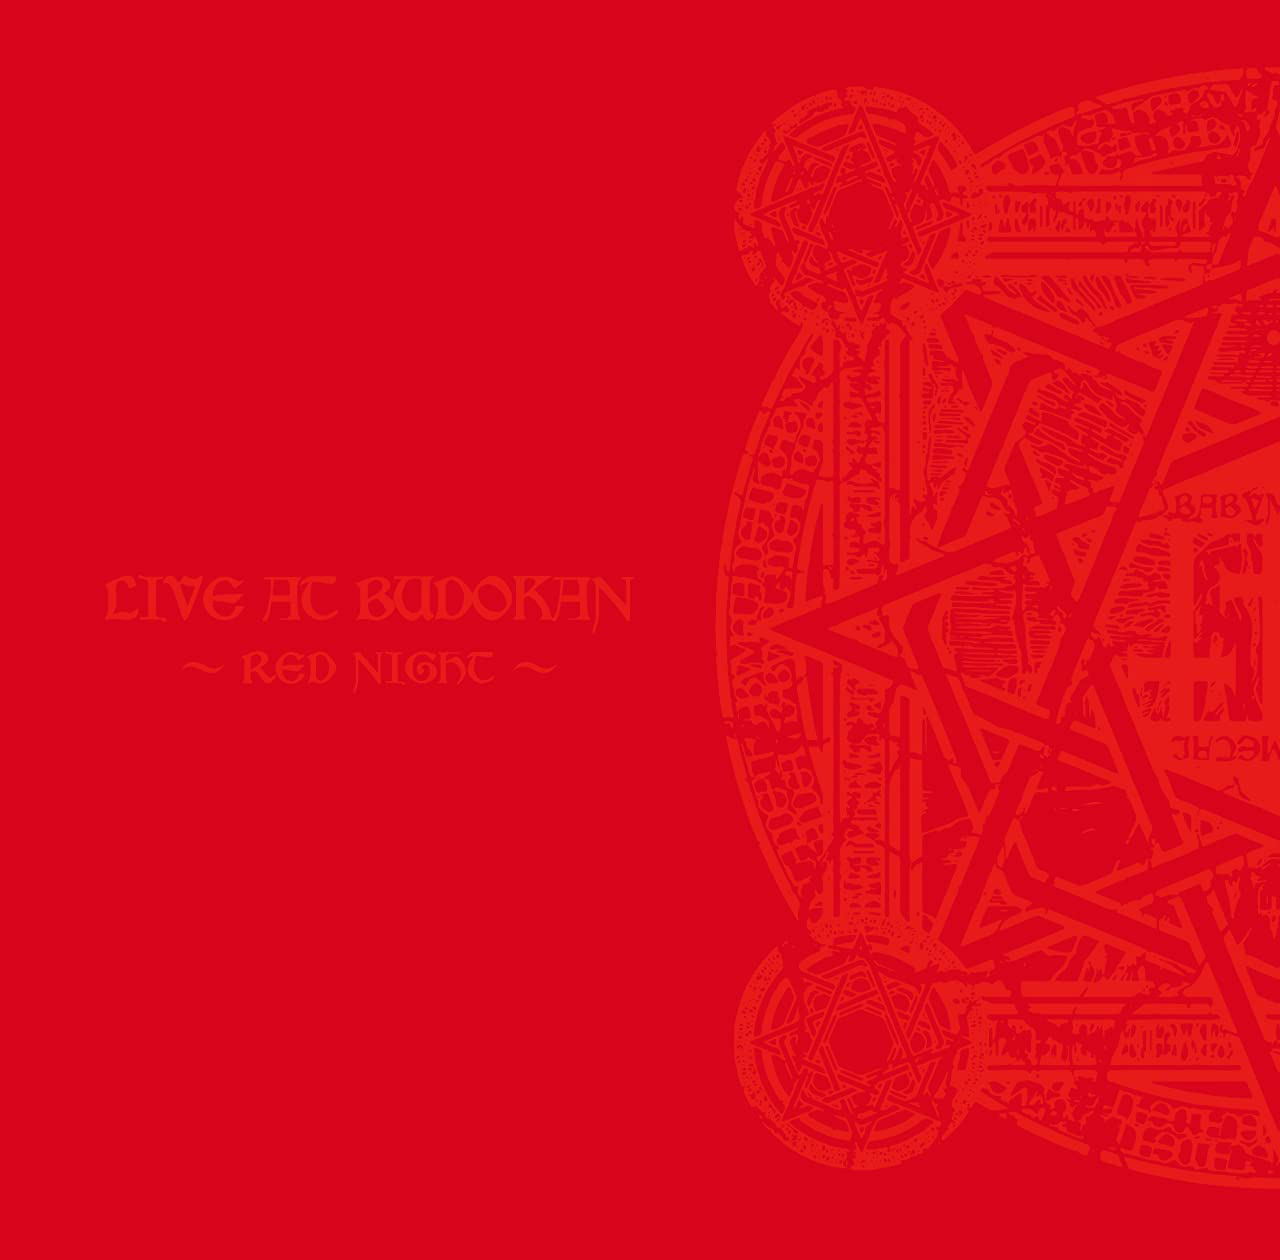 Live At Budokan - Red Night [Limited Edition] (Babymetal)